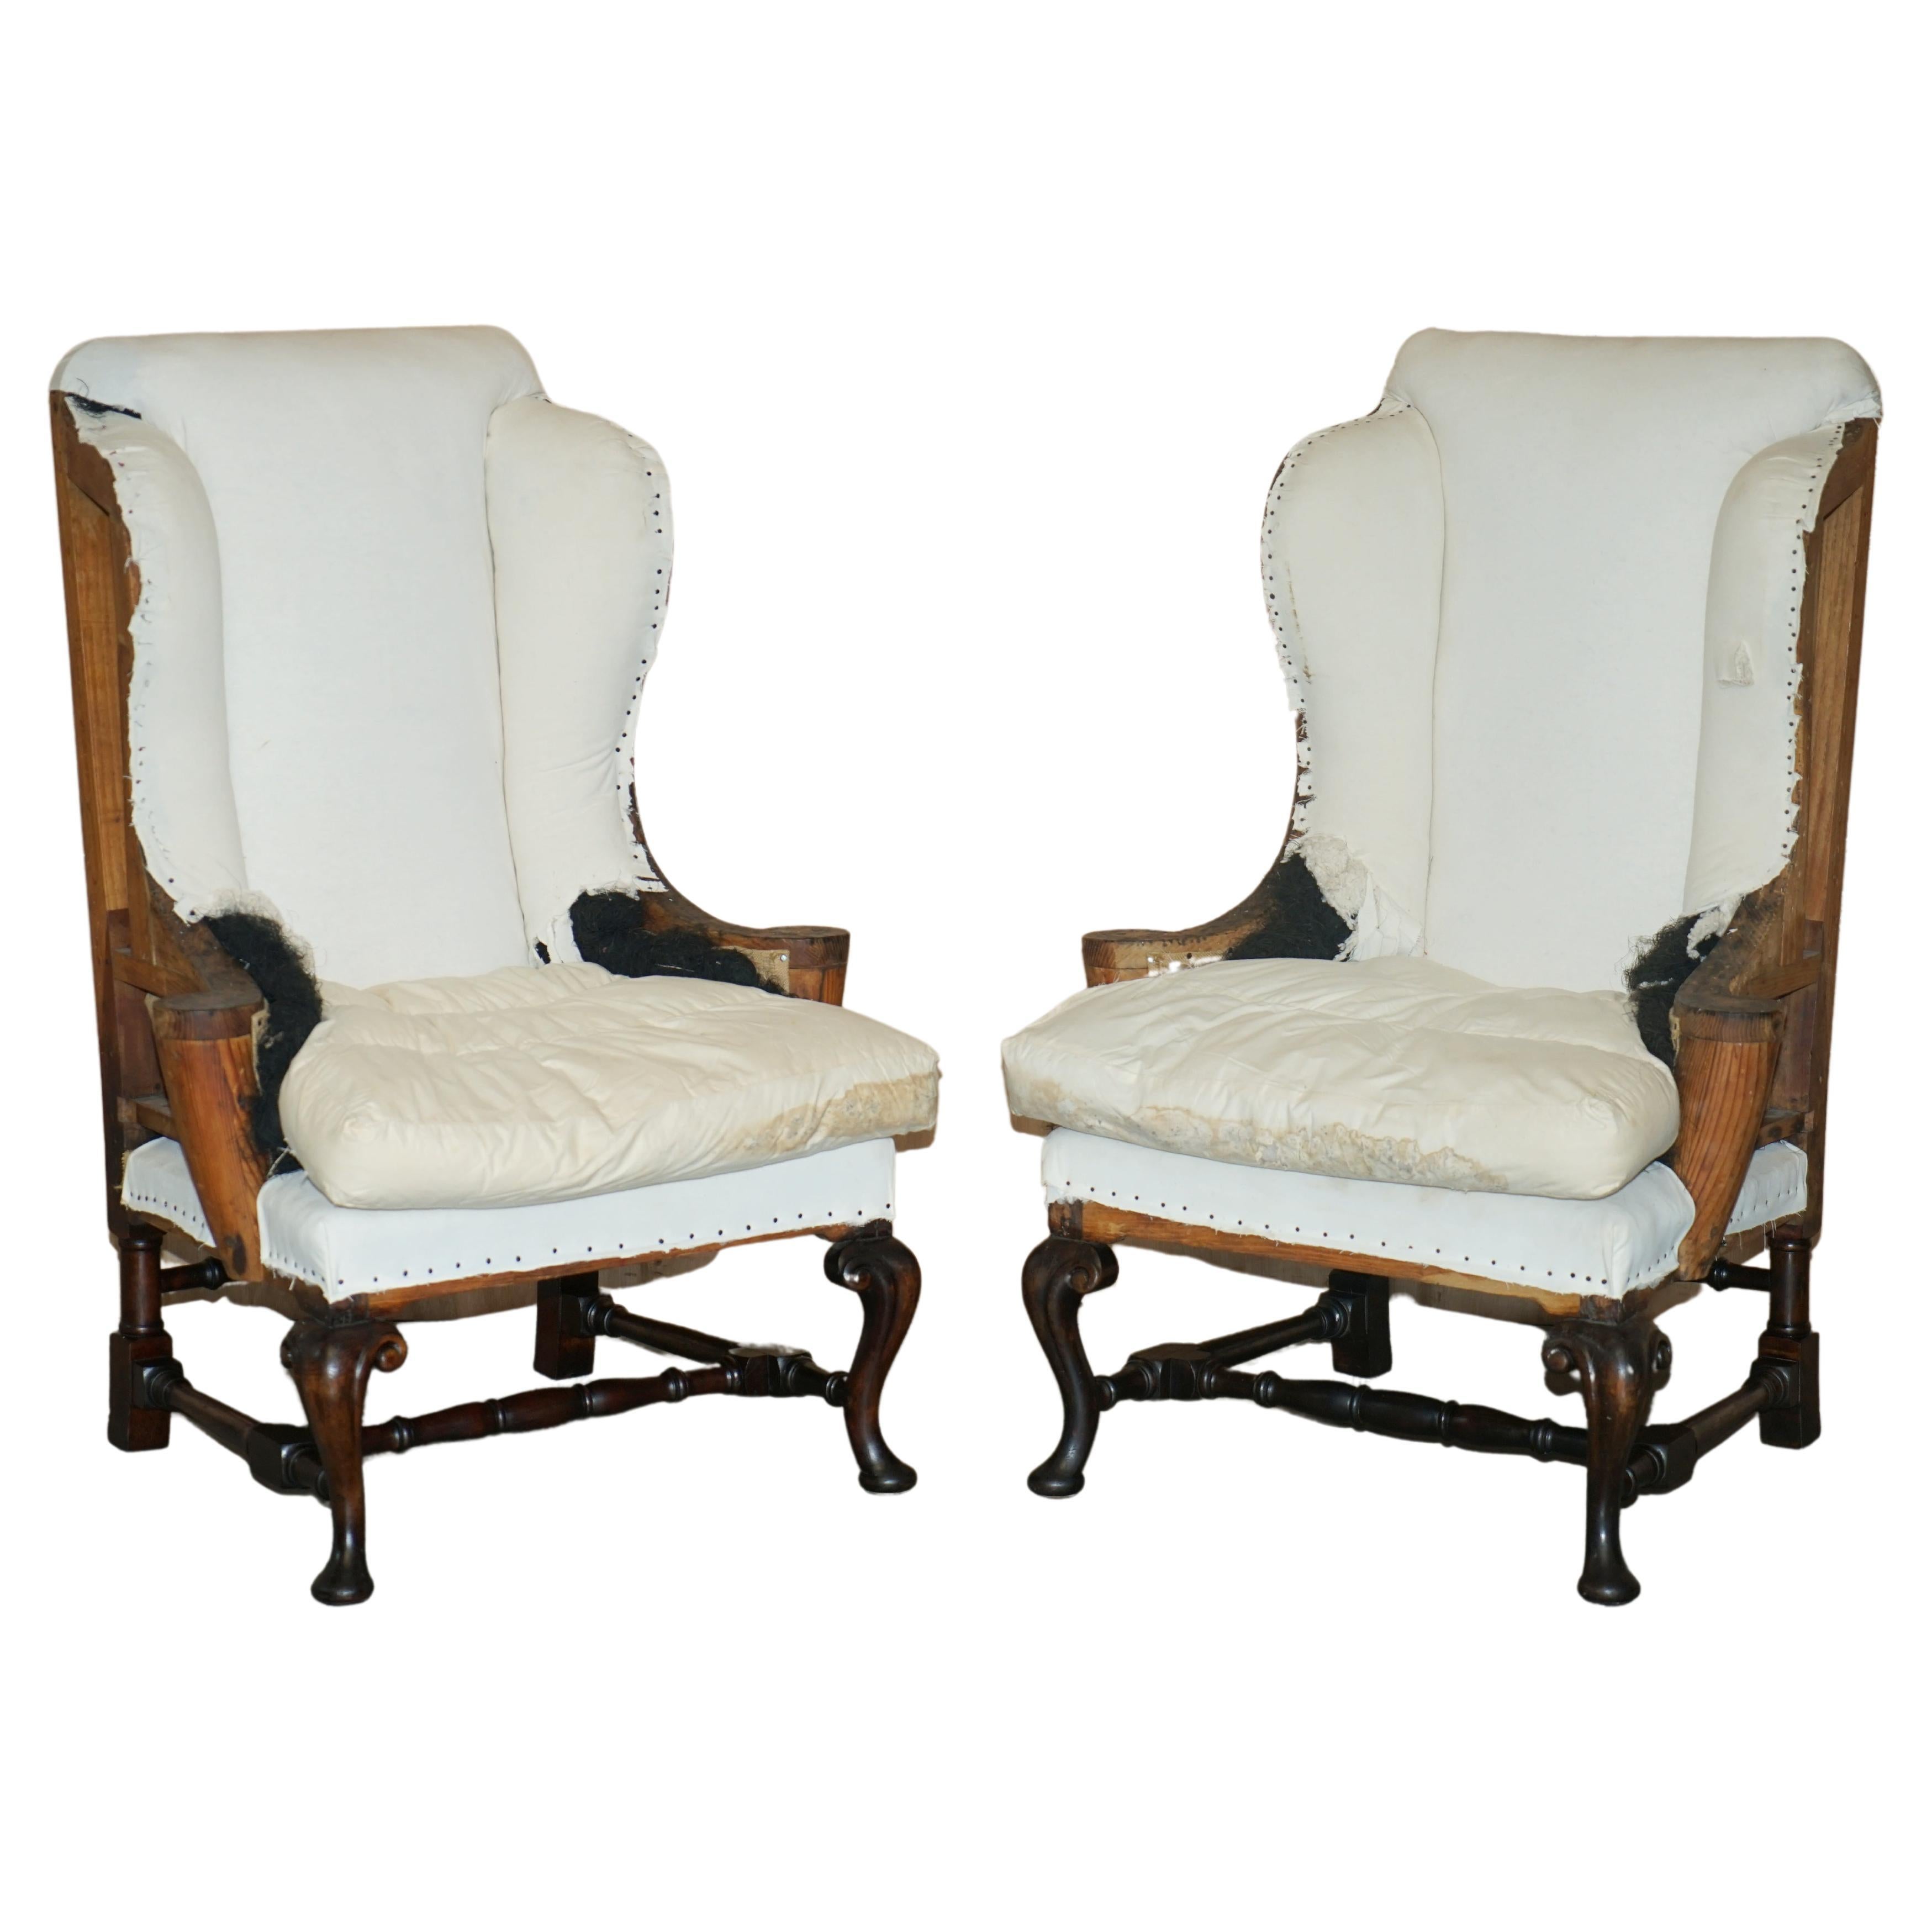 Pair of Antique Georgian Deconstructed Wingback Armchairs William Morris Arms For Sale